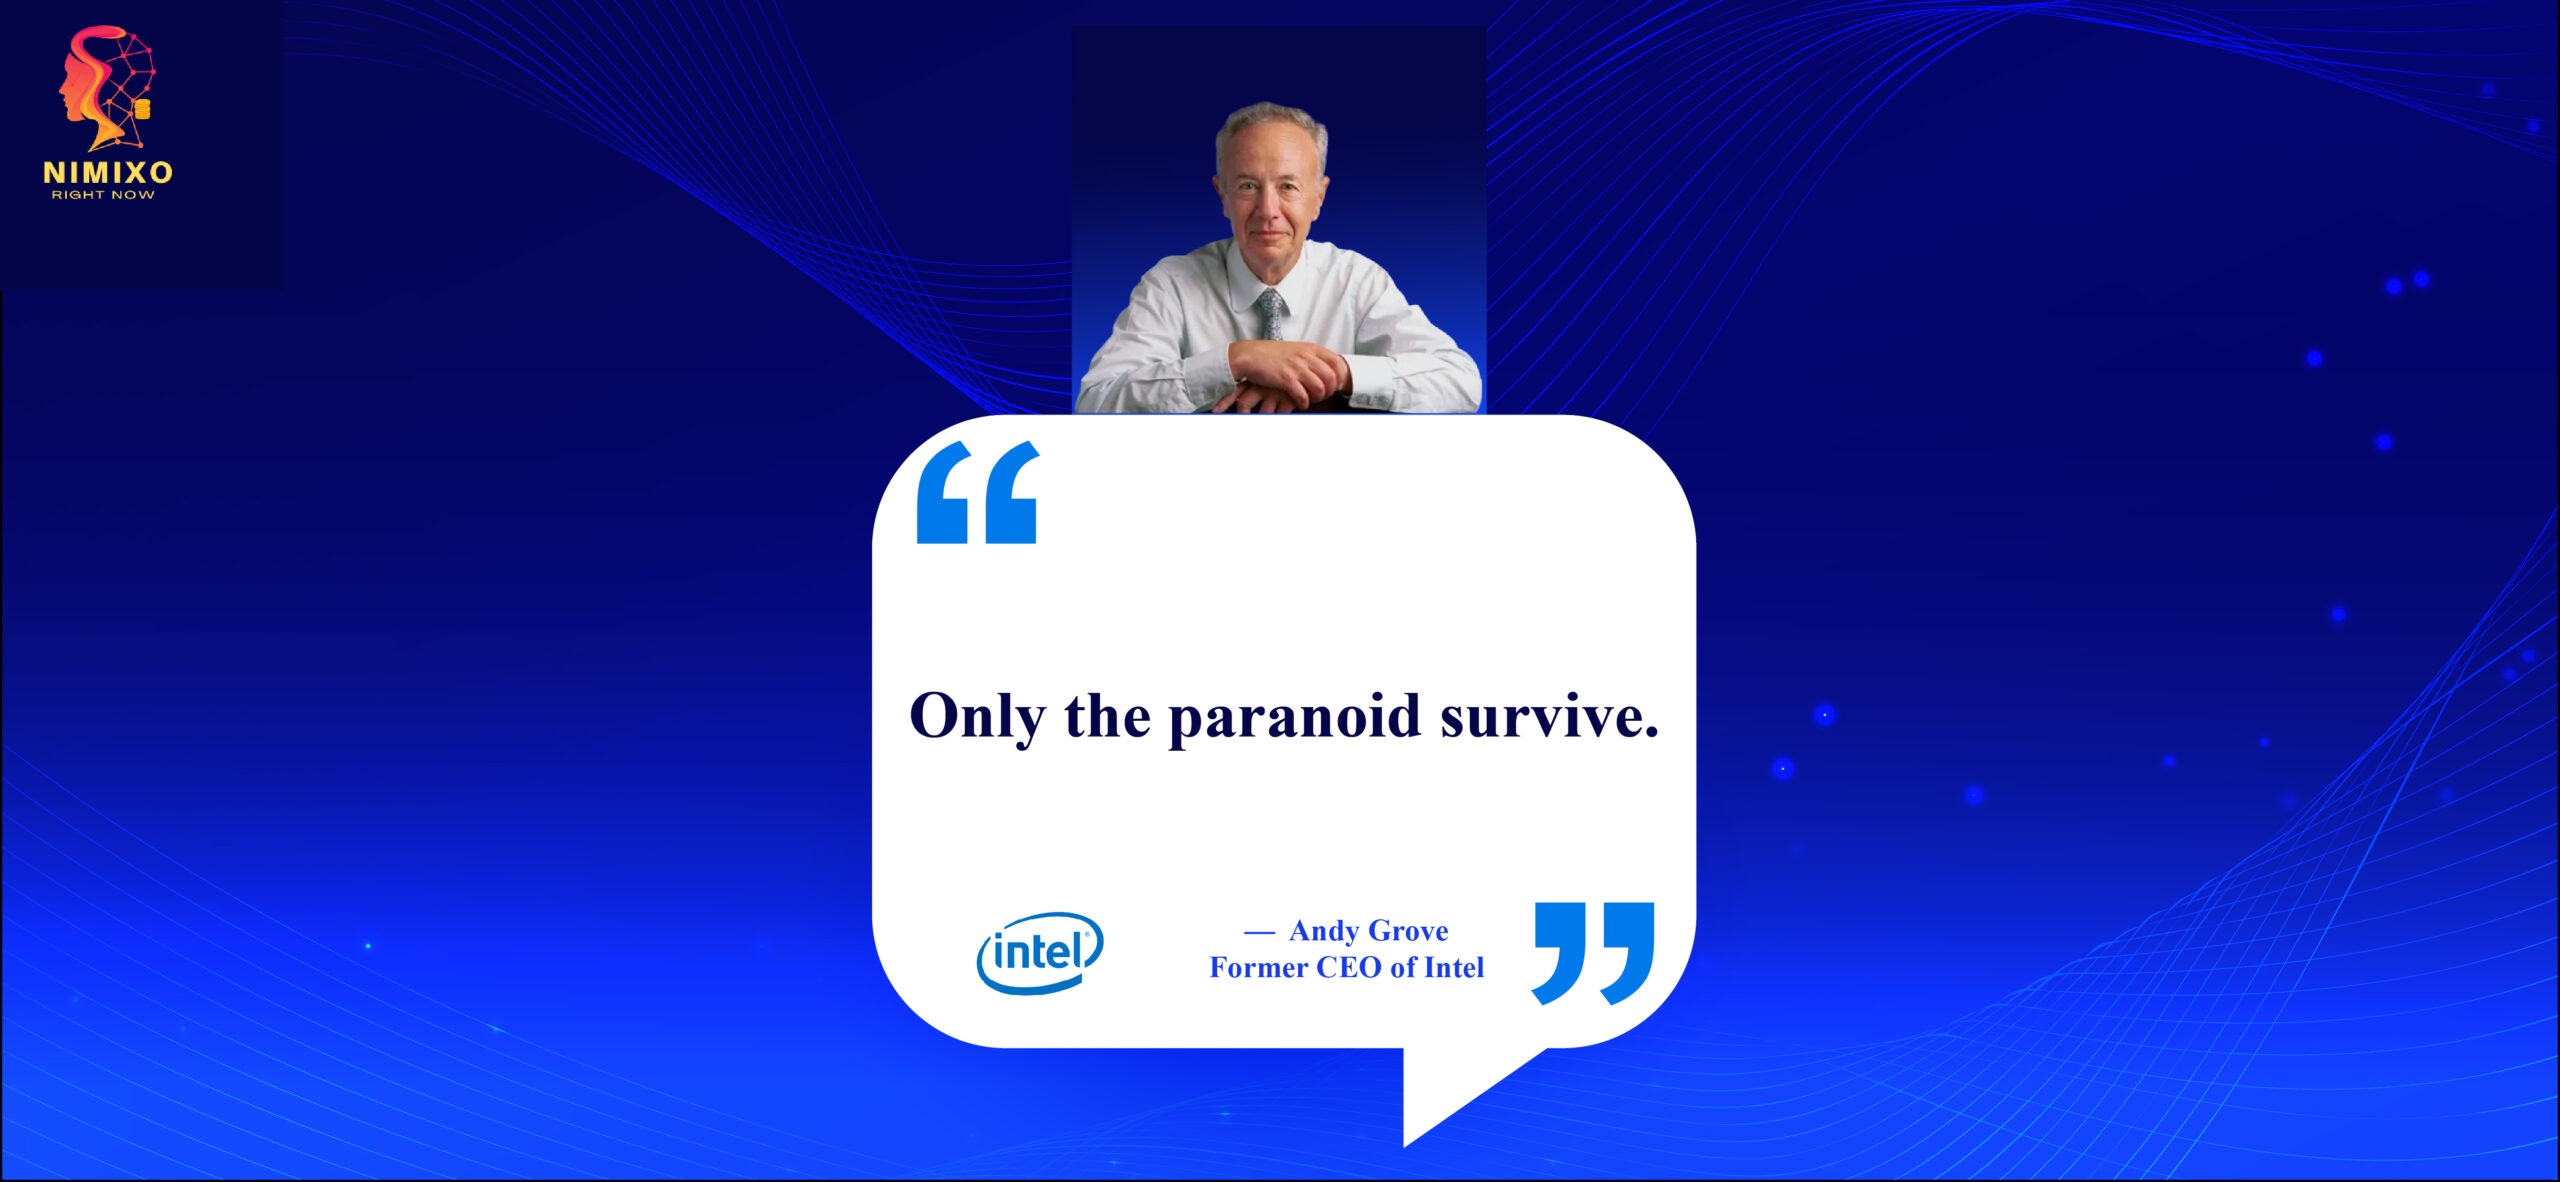 Embrace the Challenge: Cultivating Adaptability. Only the paranoid survive. -Andy Grove, former CEO of Intel